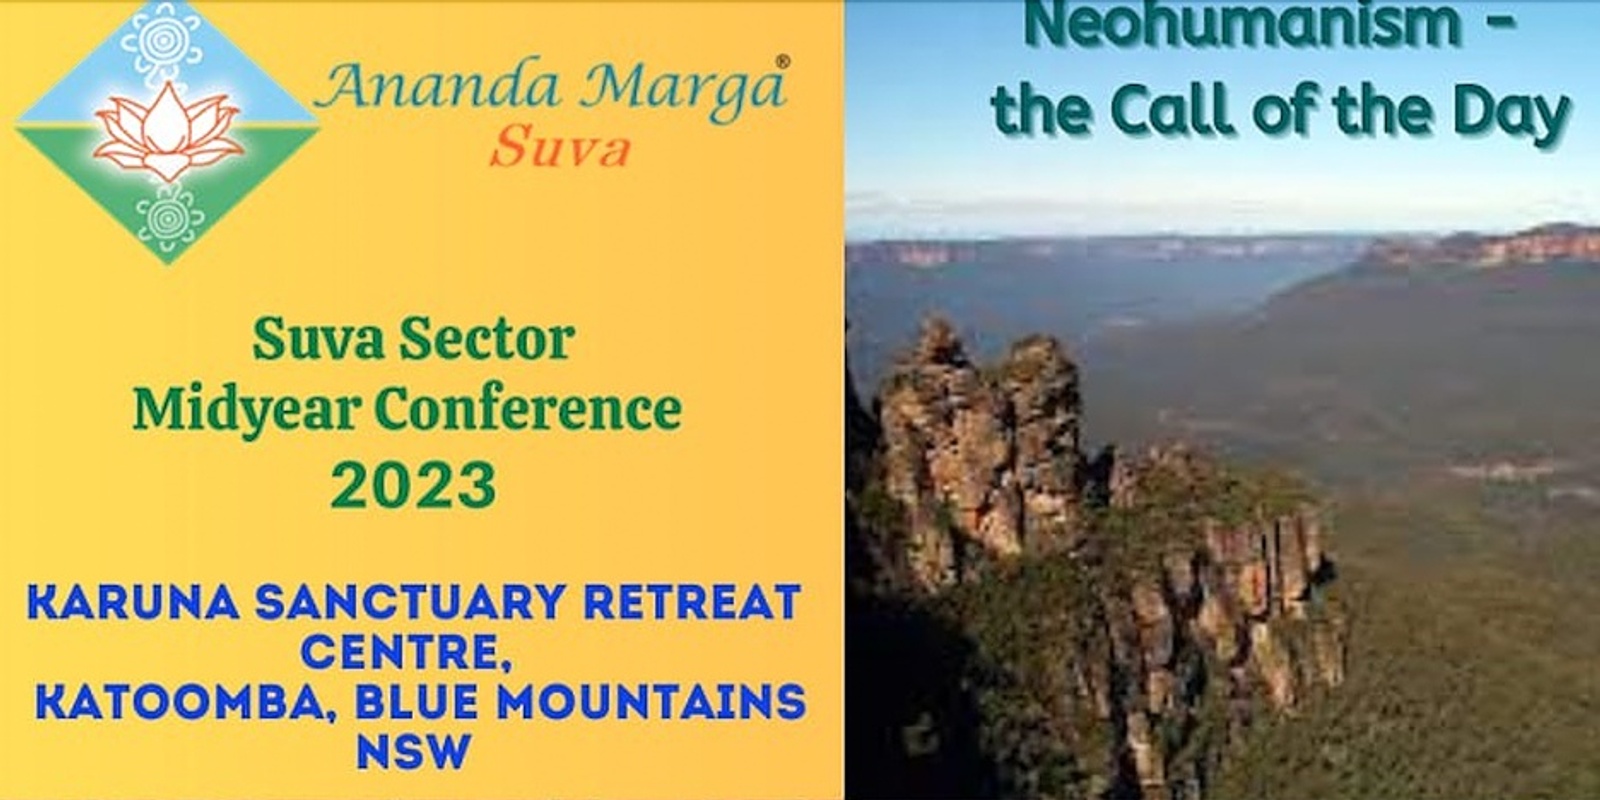 Banner image for Ananda Marga Suva MidYear Conference 2023